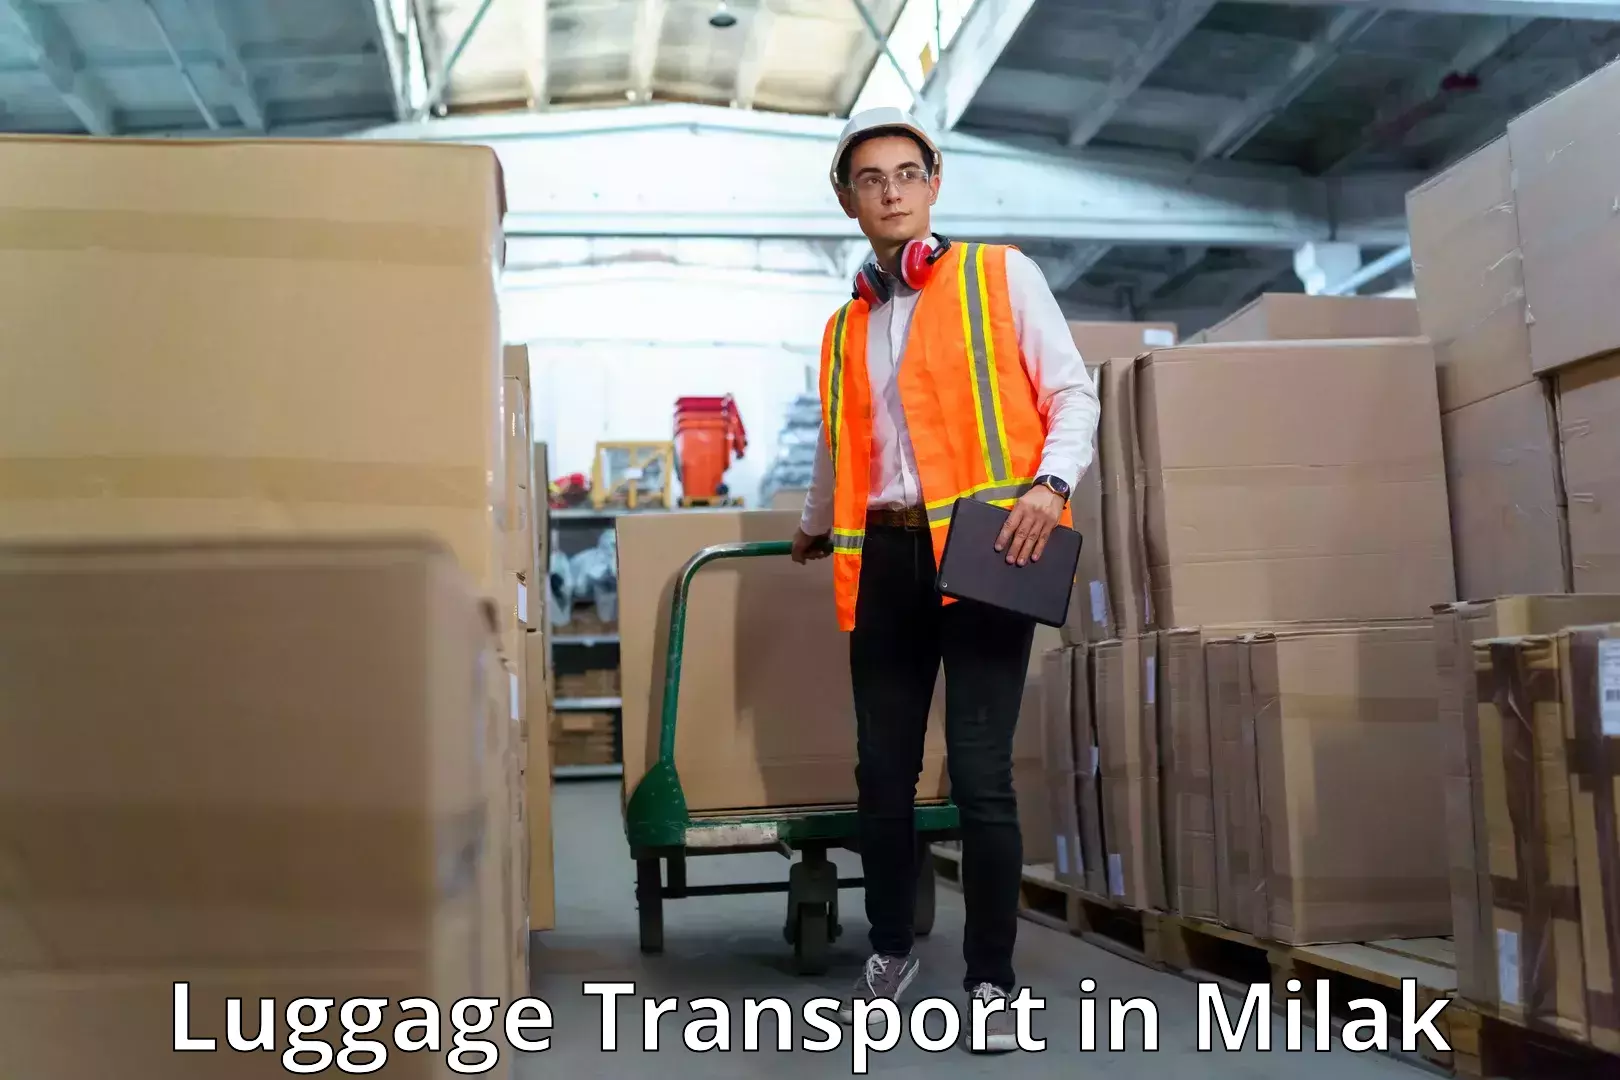 Luggage transport consulting in Milak